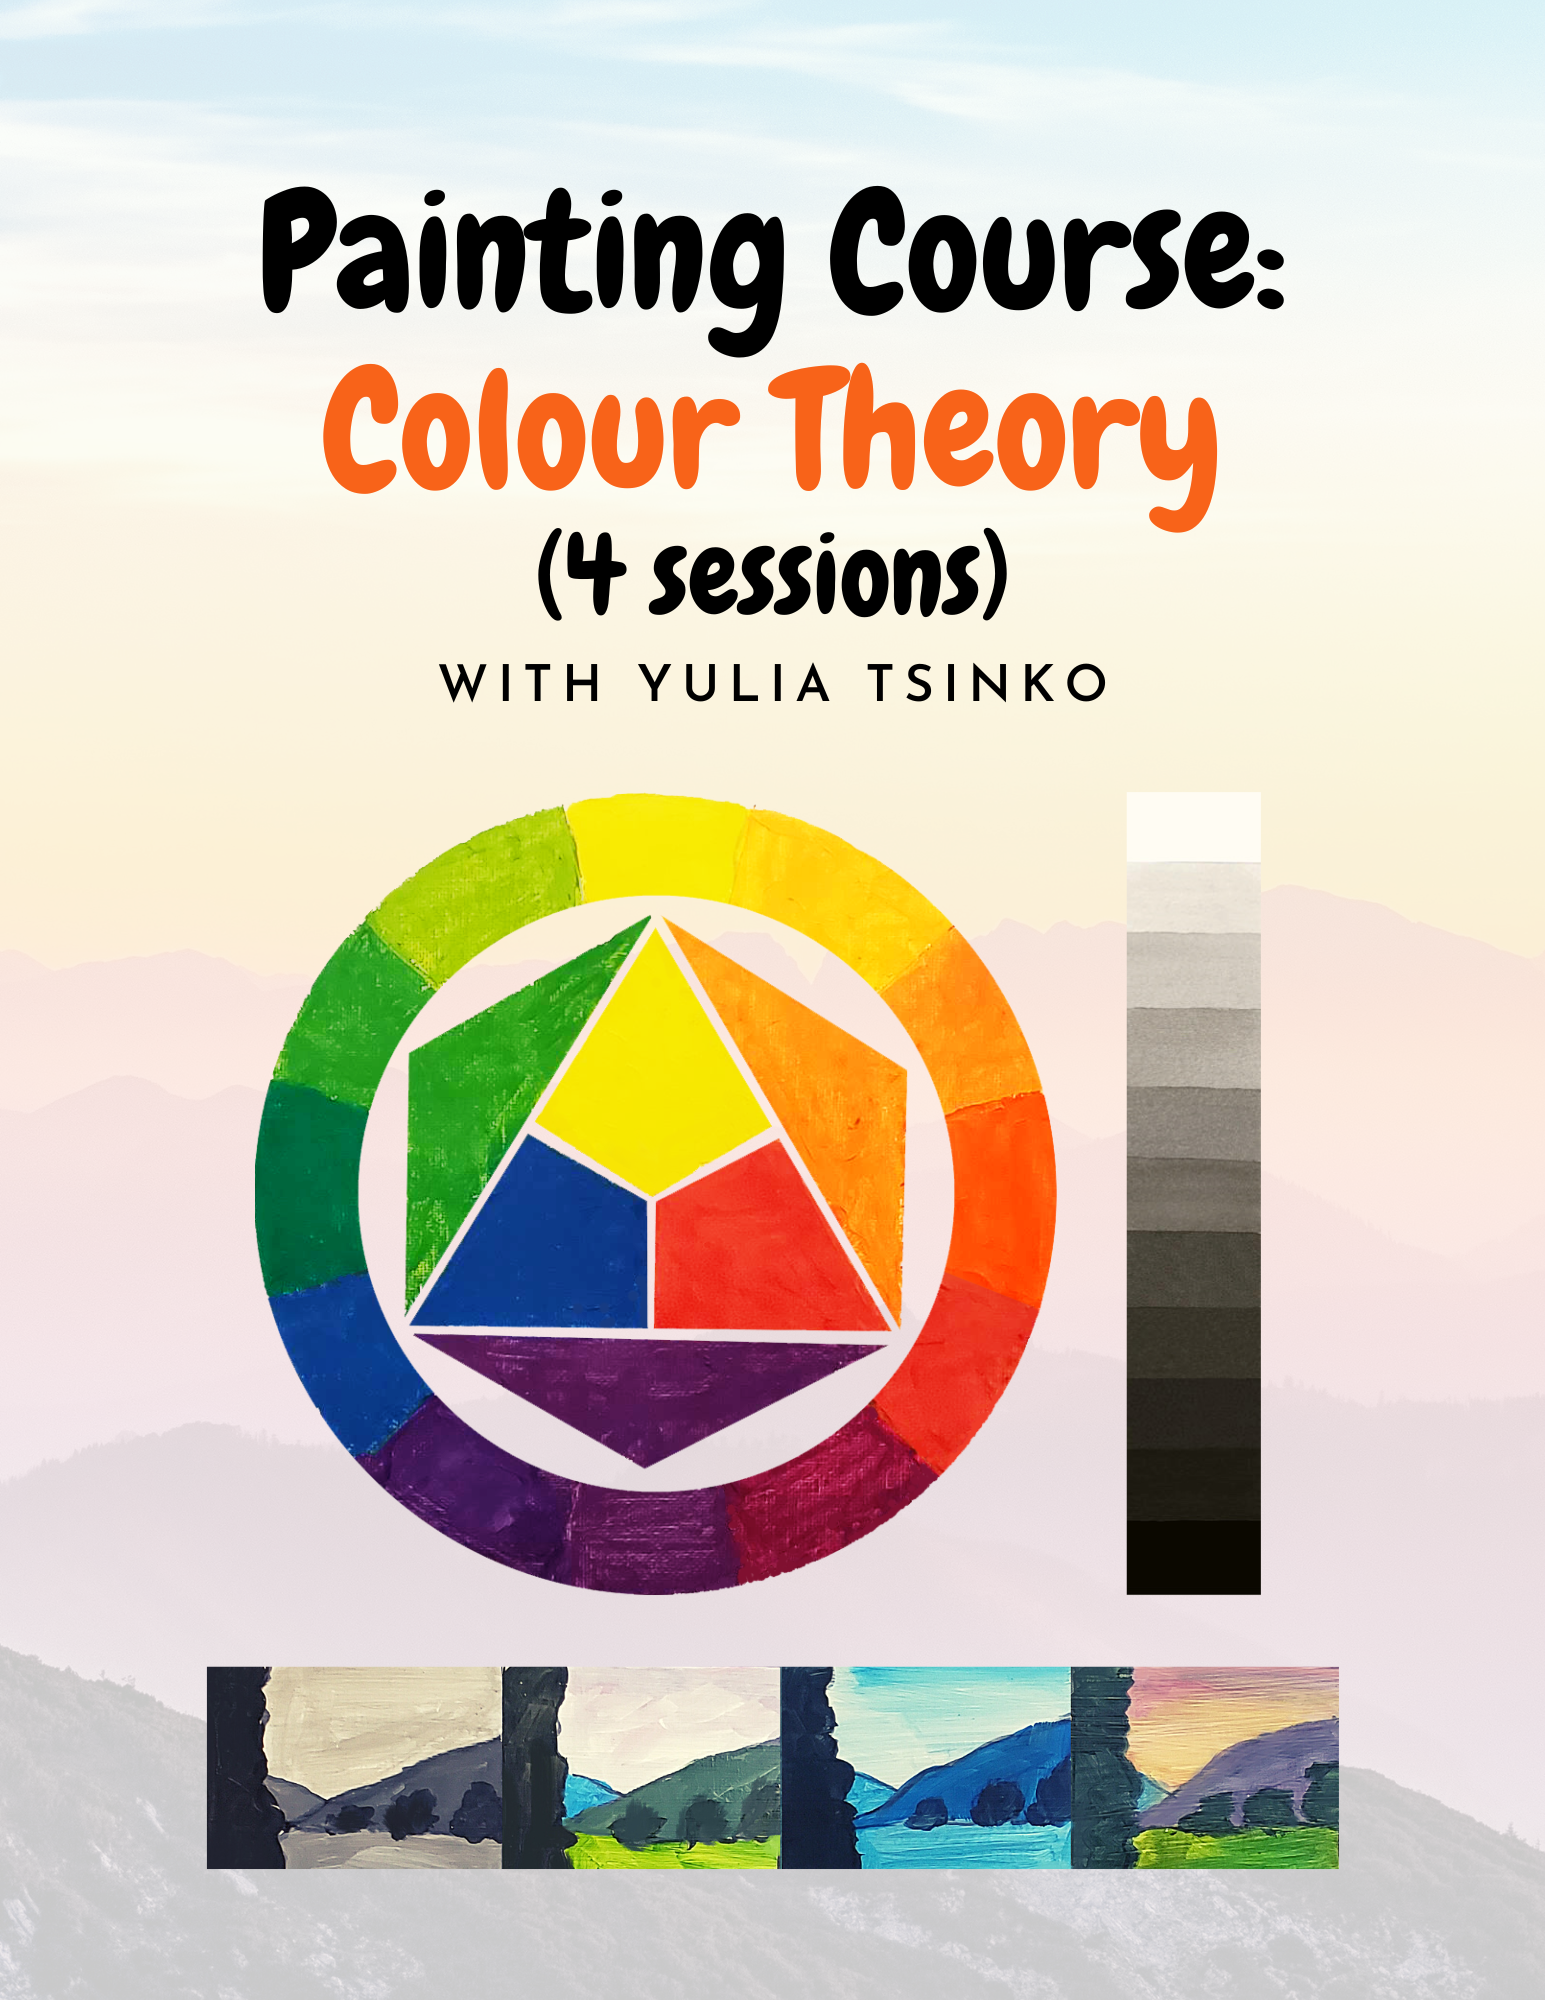 A Painting Course Colour Theory experience project by Yaymaker